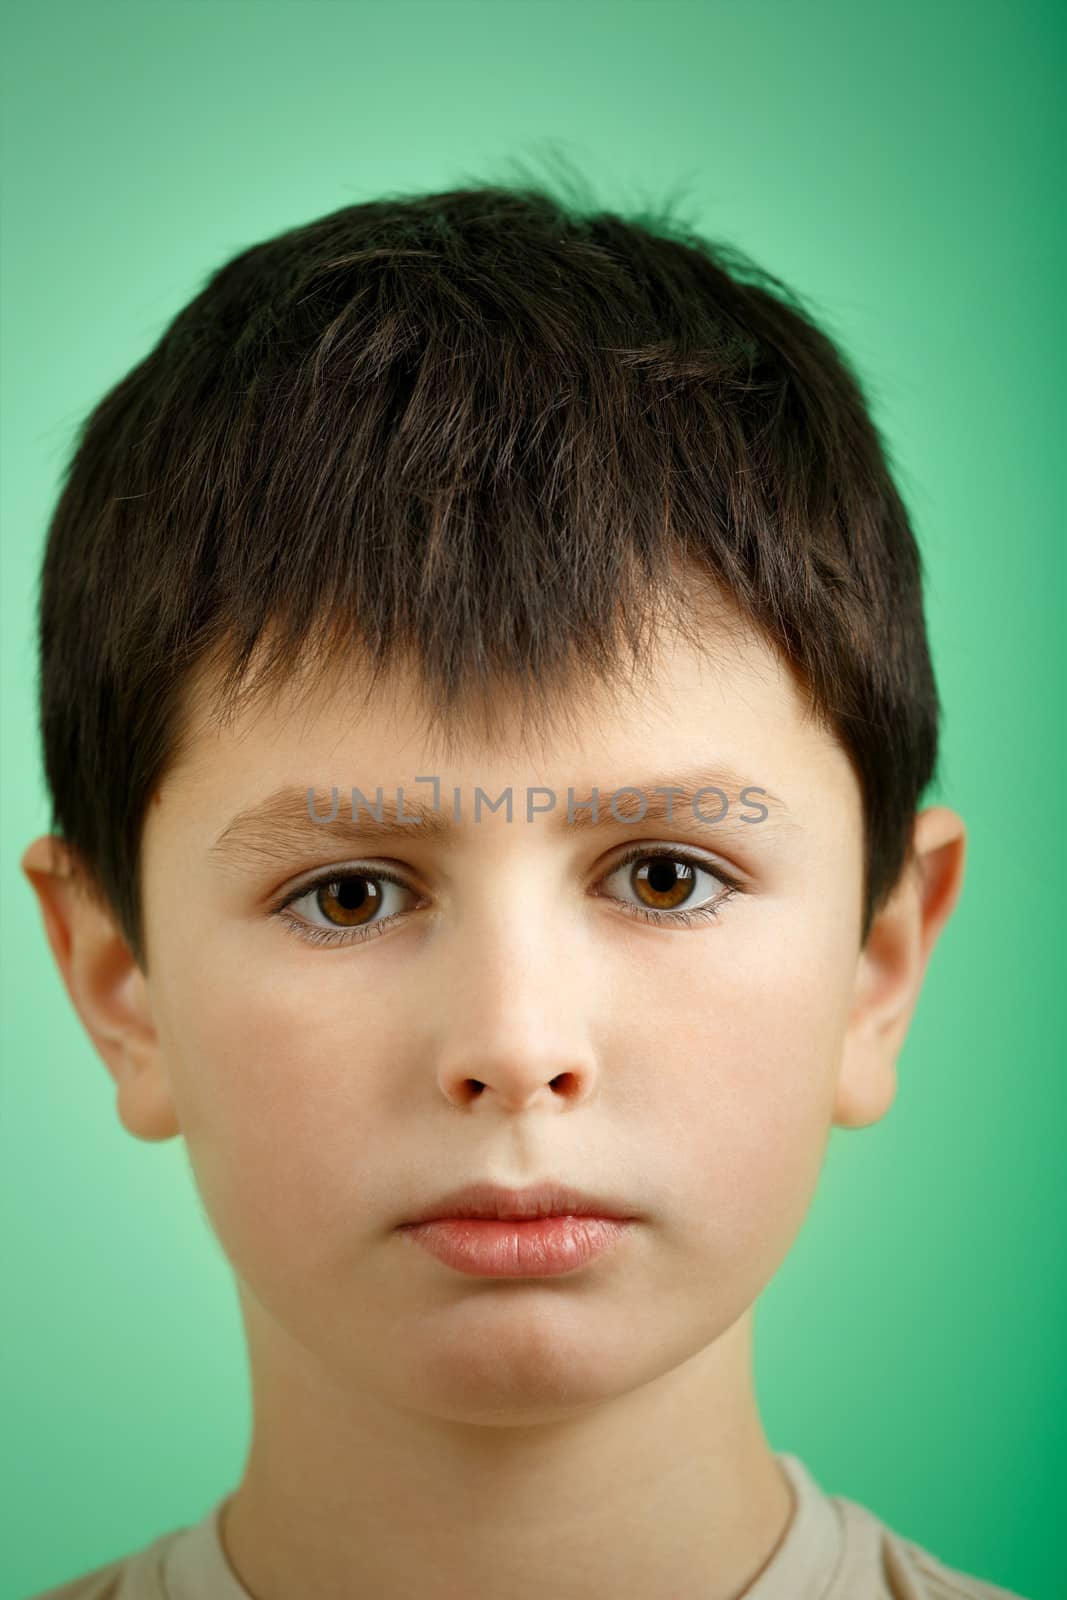 studio portrait of young boy on green background